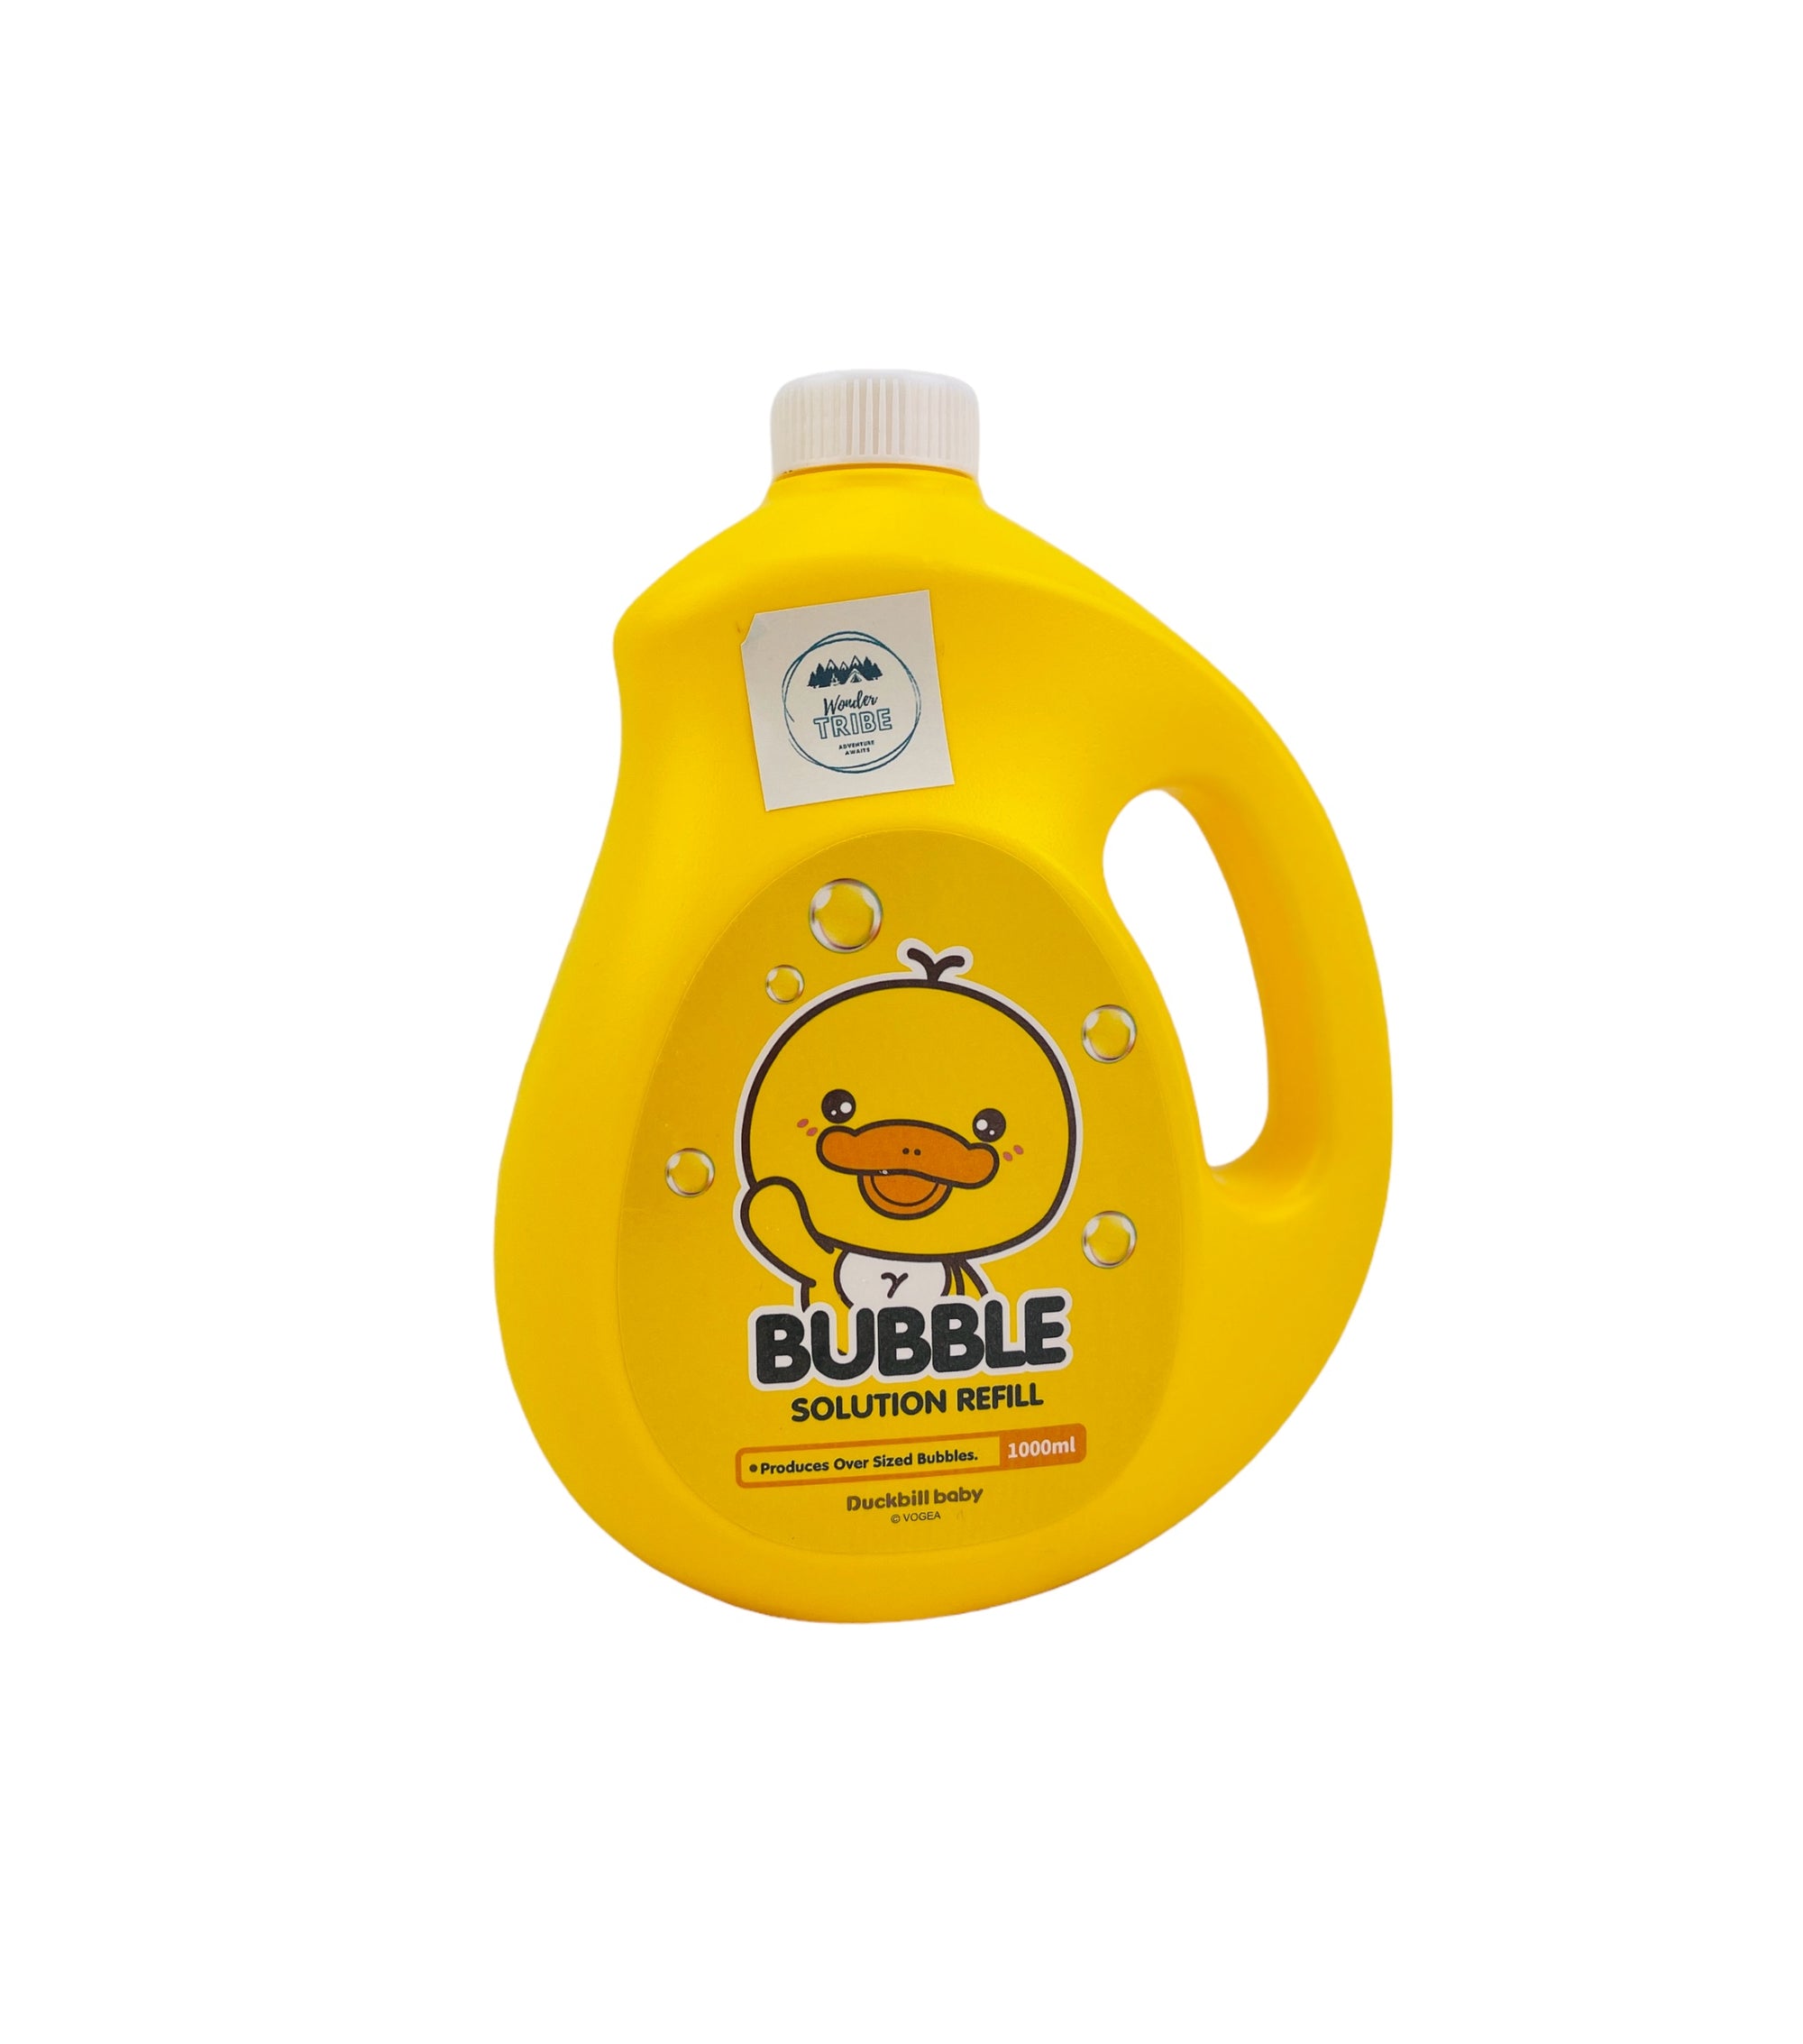 the Bubble Mix - 1 Litre bottle pictured on a white background